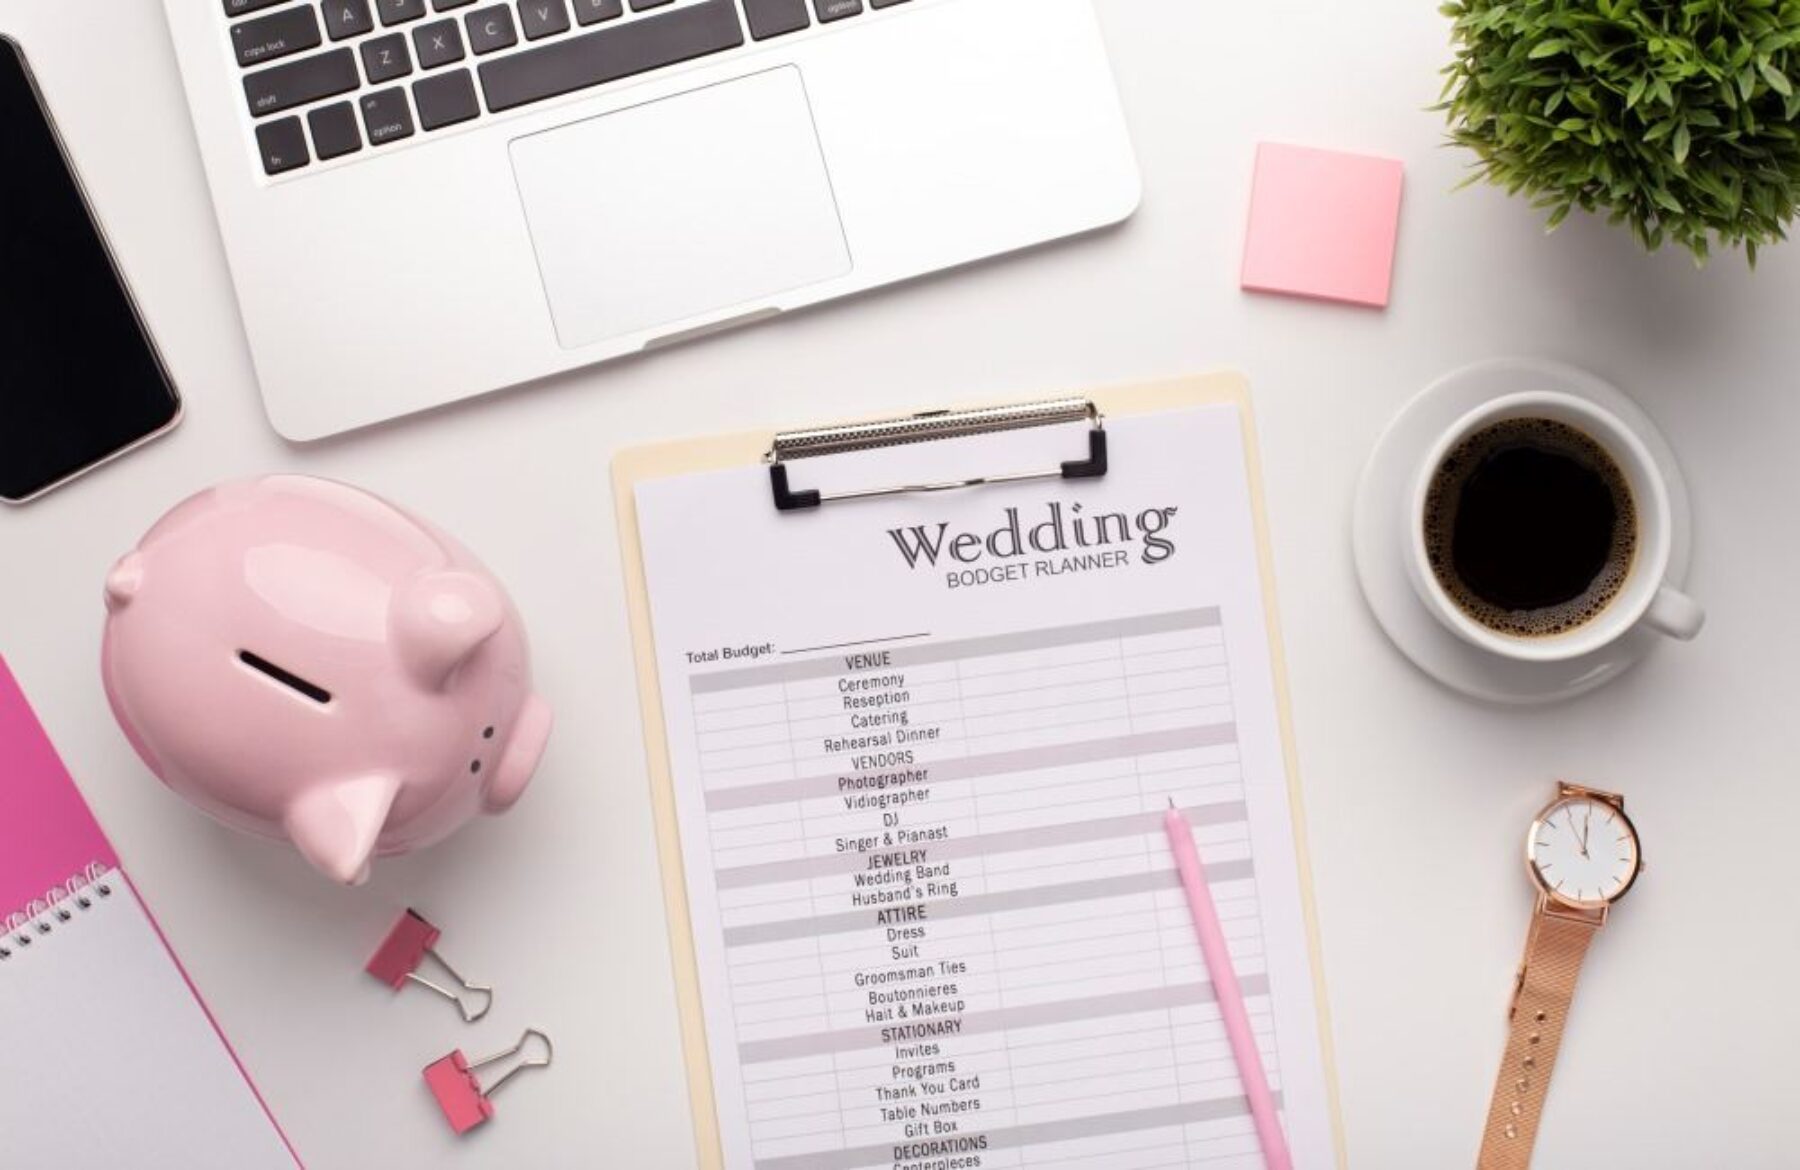 Top Tips to Keep Your Wedding On Budget